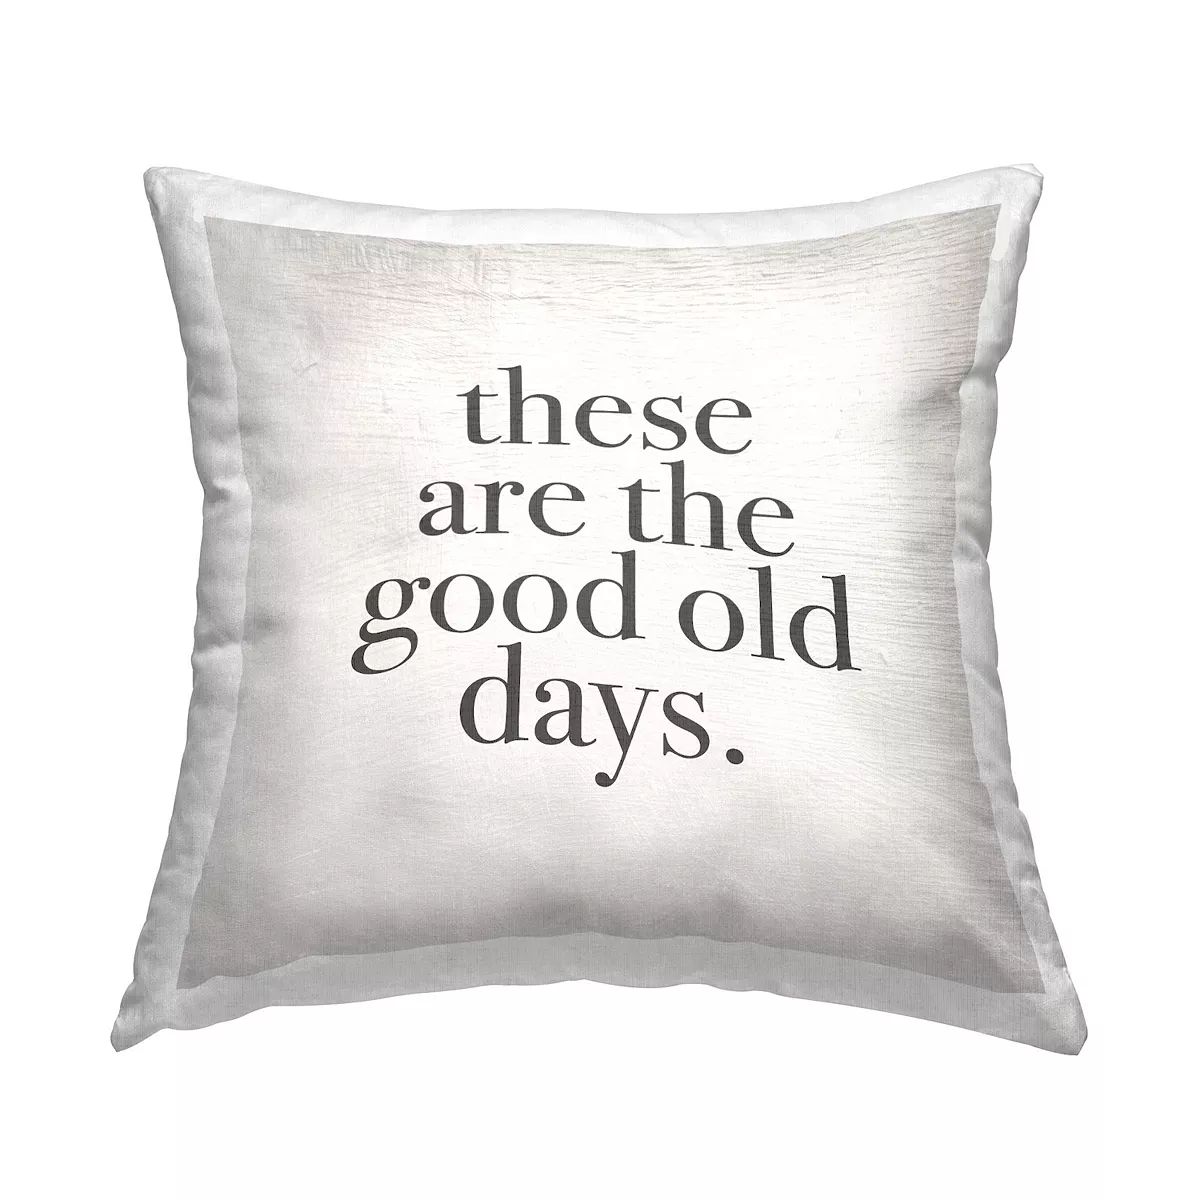 Stupell Home Decor These Are The Good Old Days Decorative Throw Pillow | Kohl's